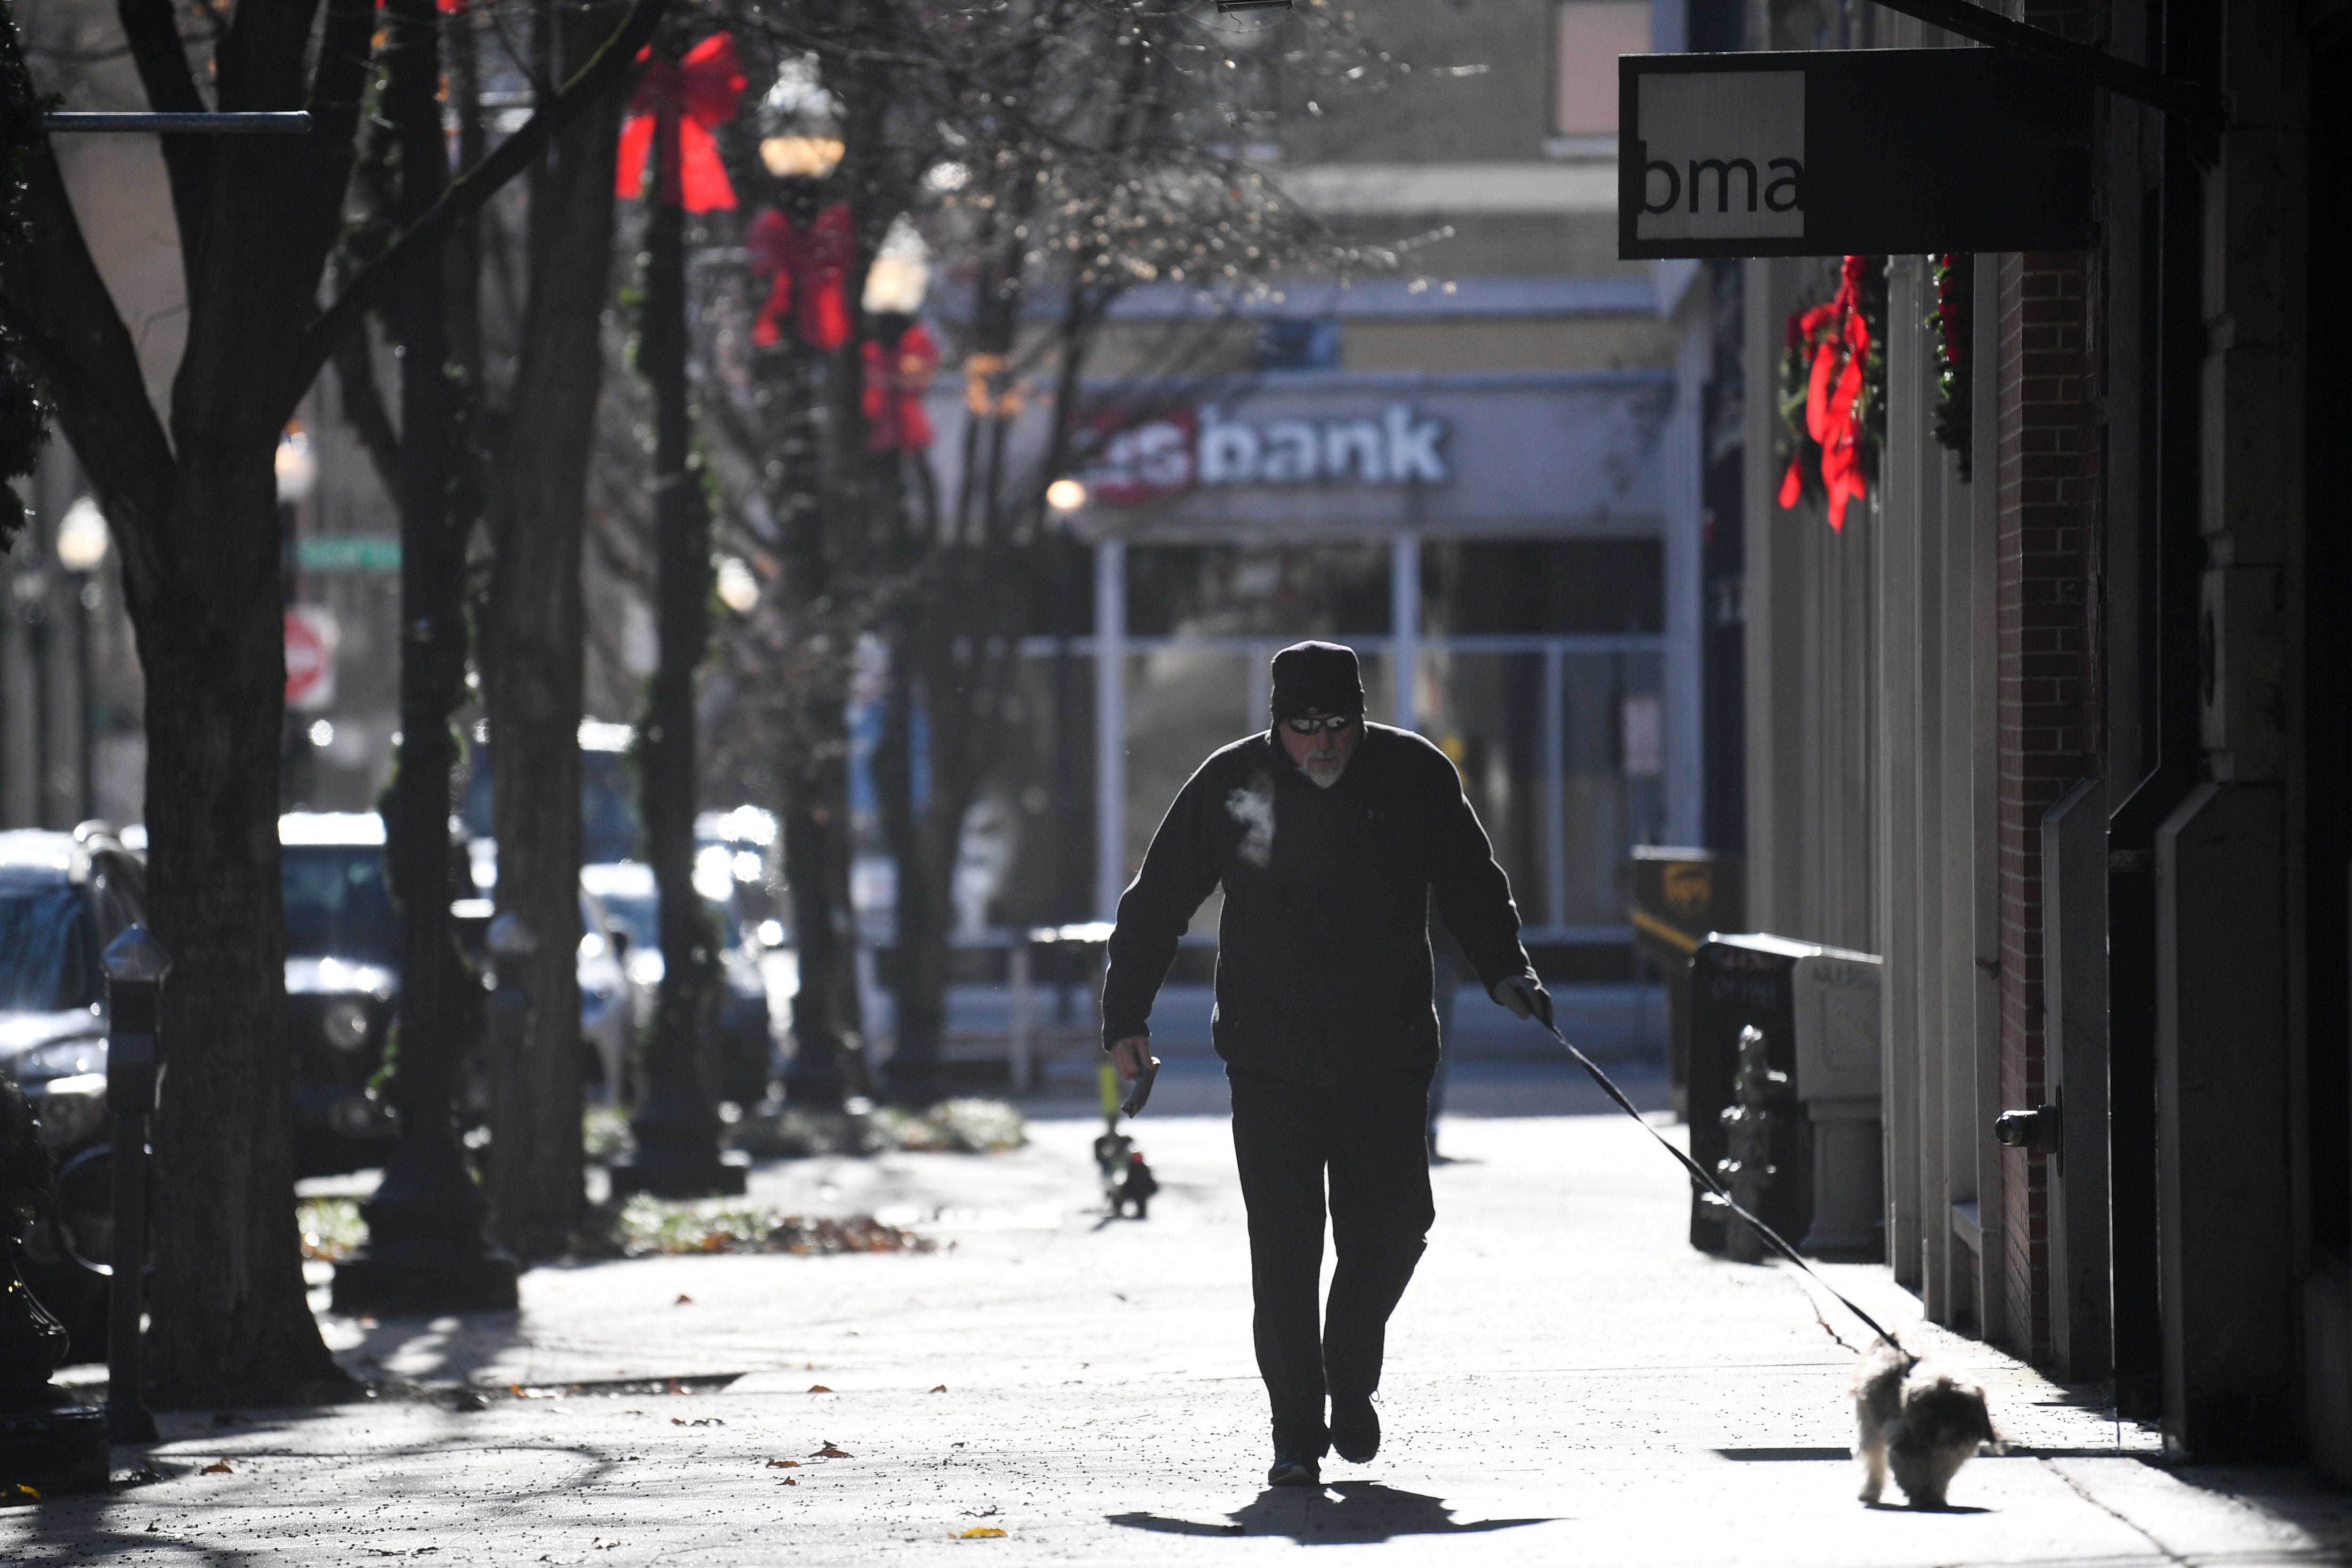 A man walks his dog near Market Square in downtown Knoxville on Dec. 23. The temperature hovered around 7 degrees early that day after a winter storm moved into the region.